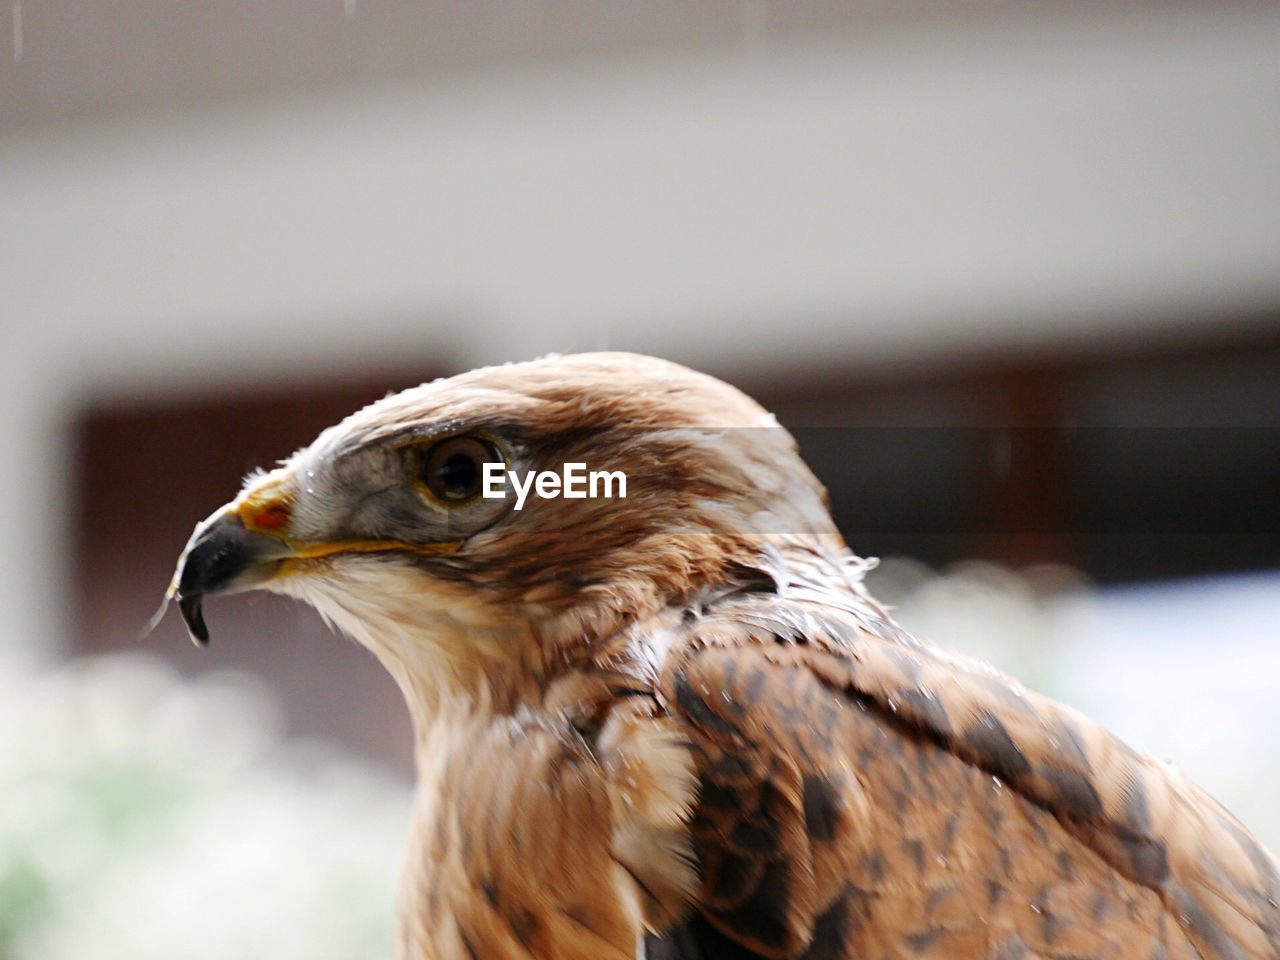 CLOSE-UP OF EAGLE AGAINST BLURRED BACKGROUND